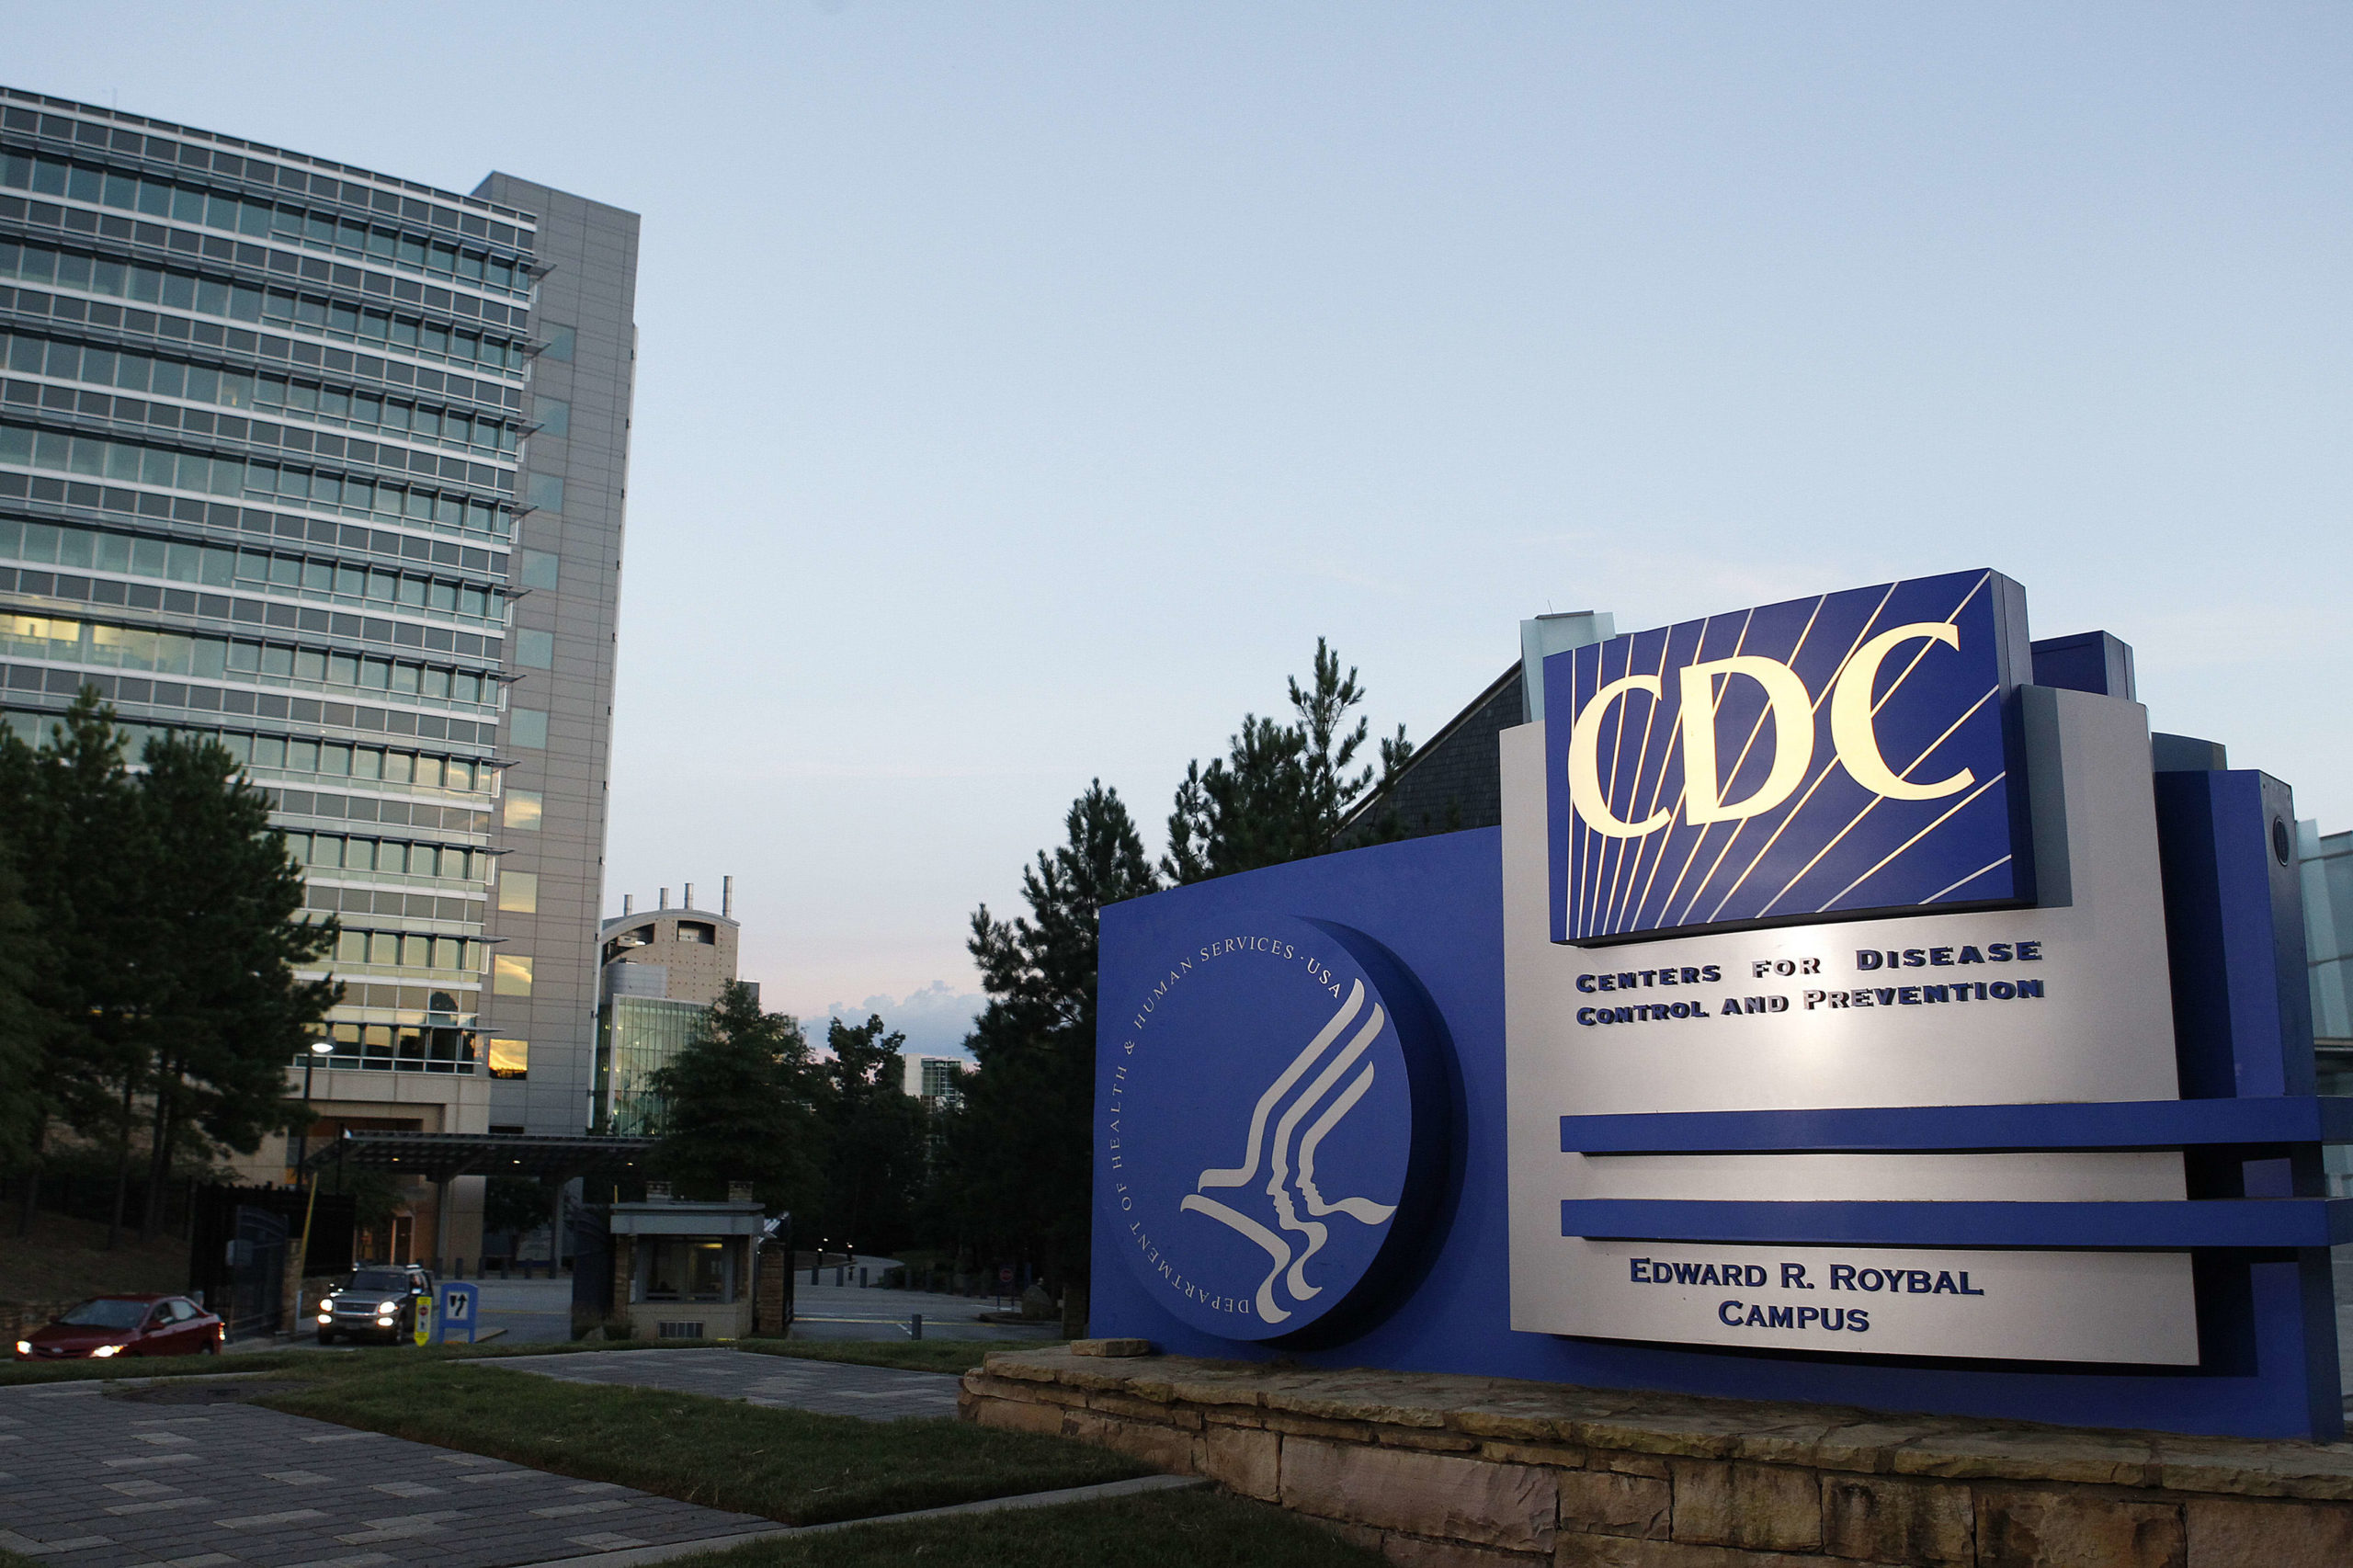 Quarantined evacuees demand oversight in new petition in opposition to CDC